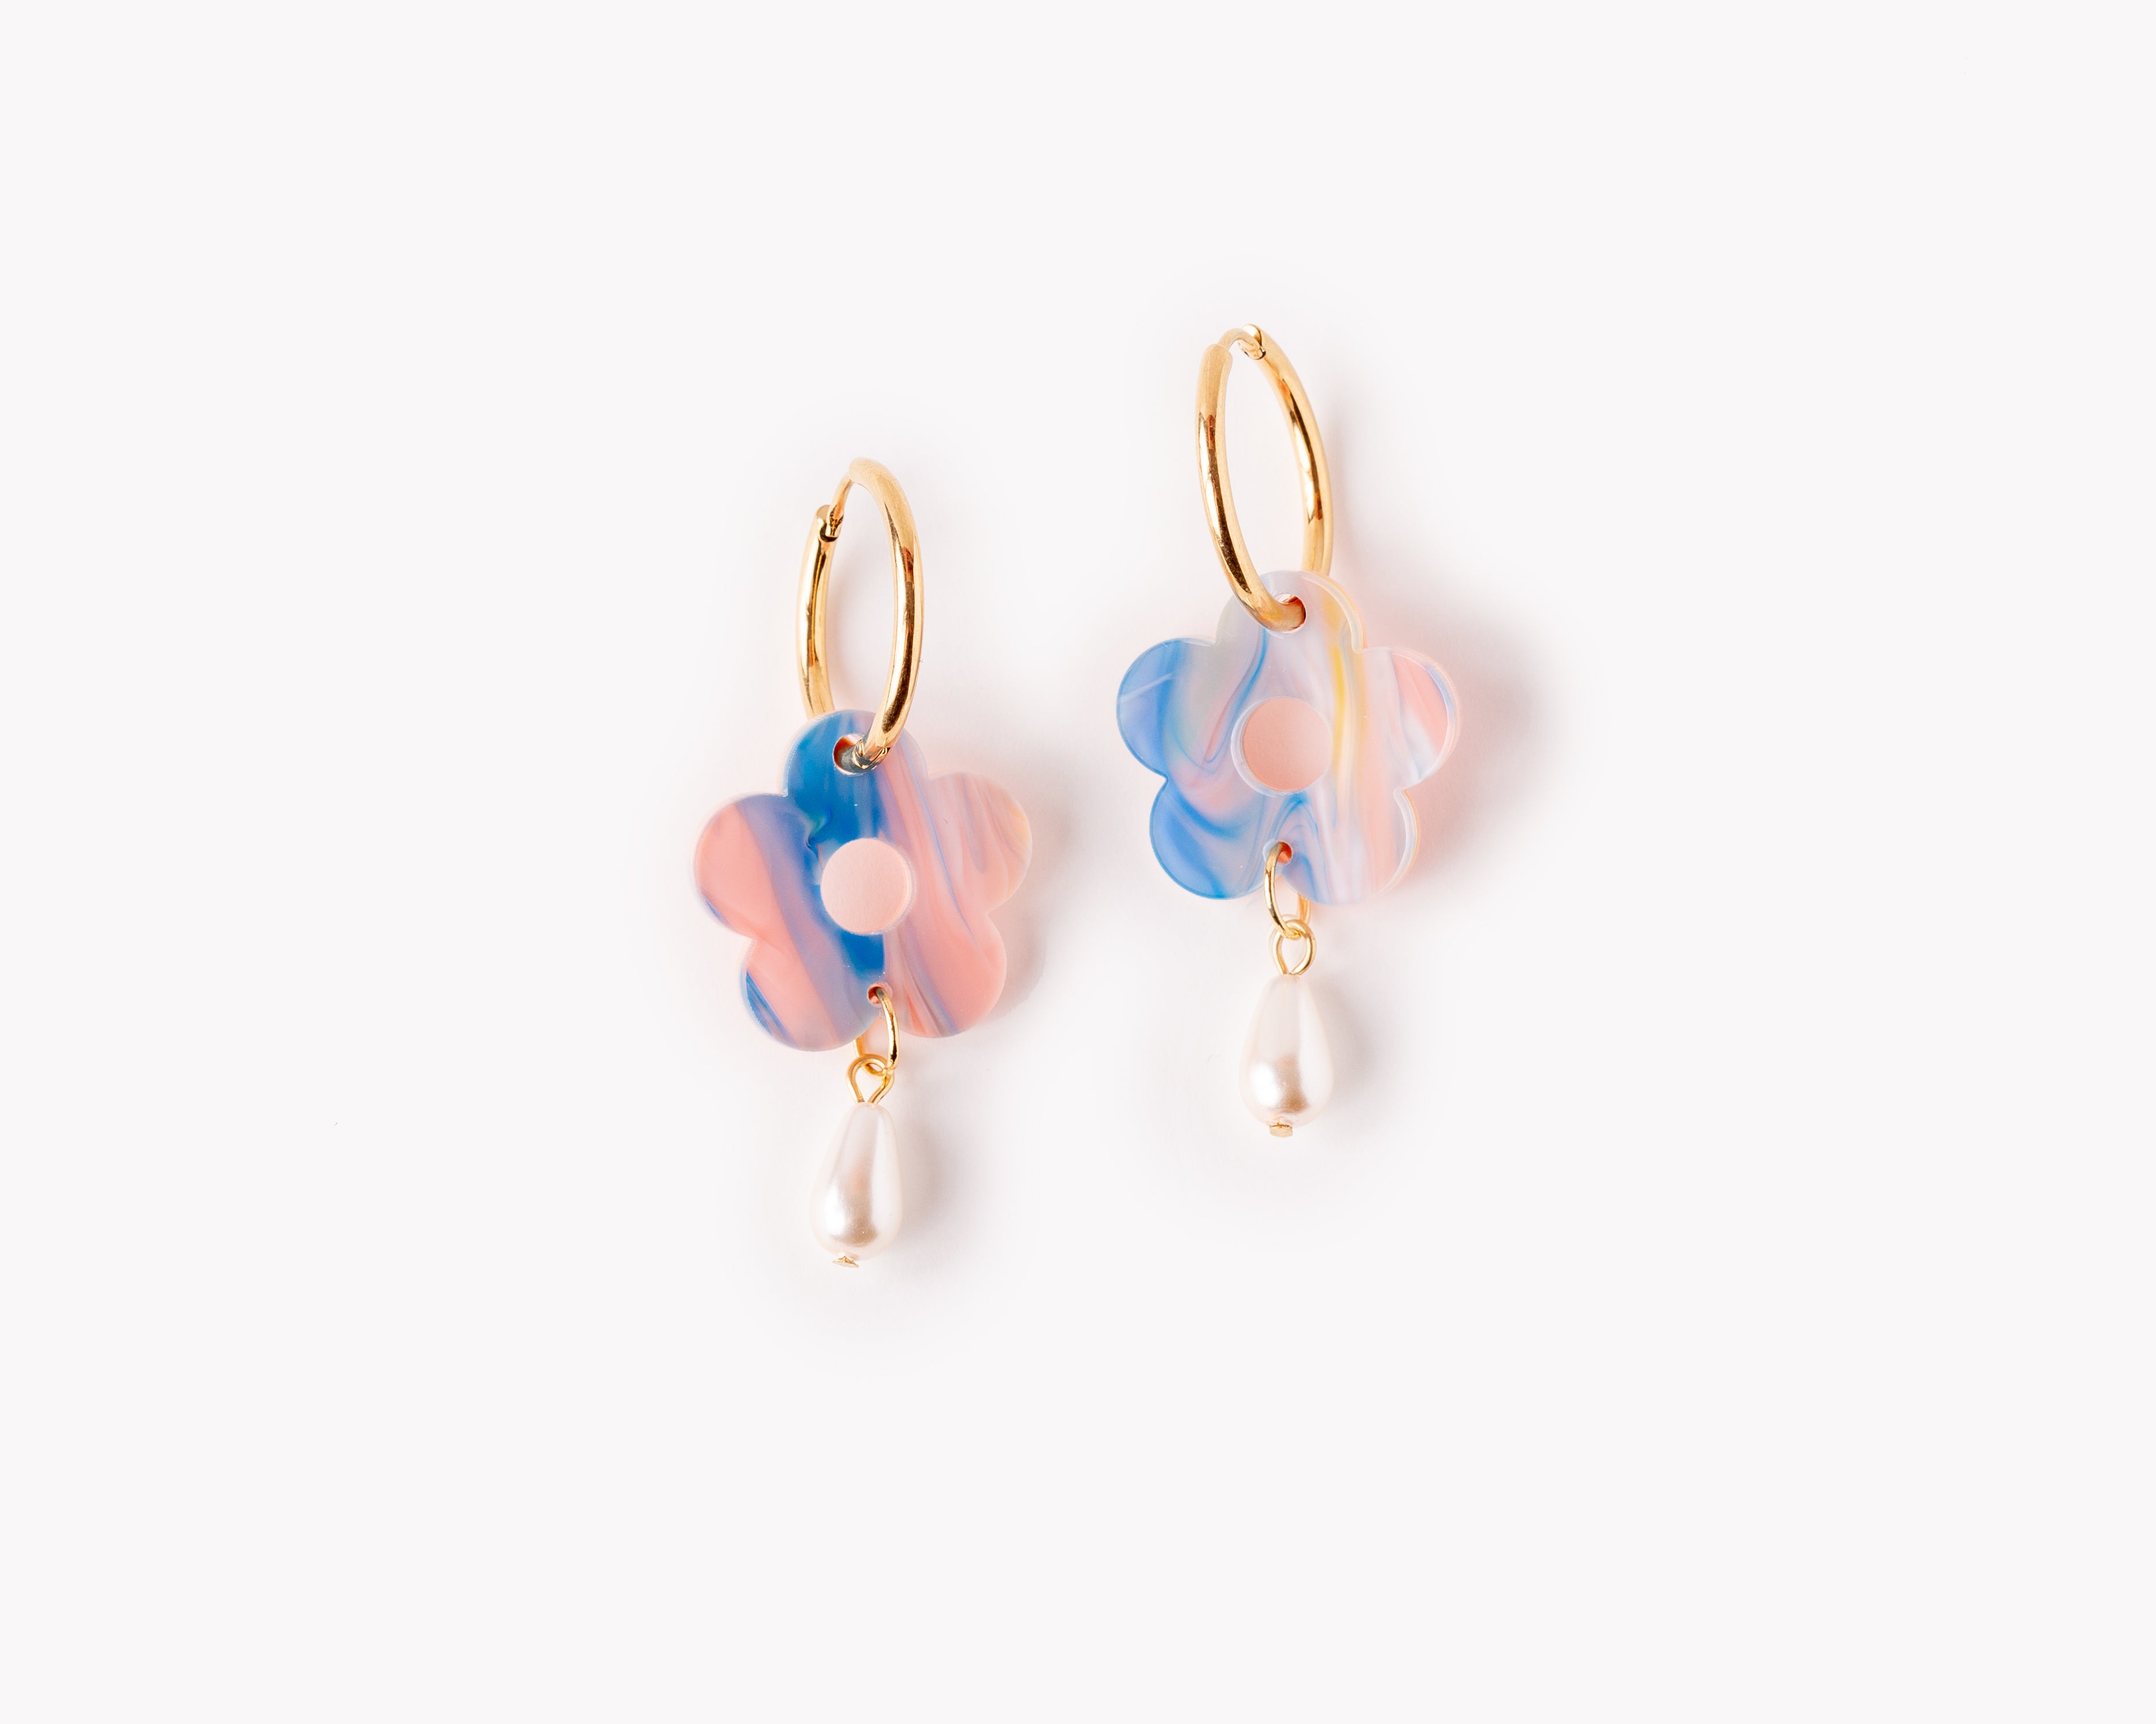 Large flower hoop earrings with pearls in watercolor - Limited Edition